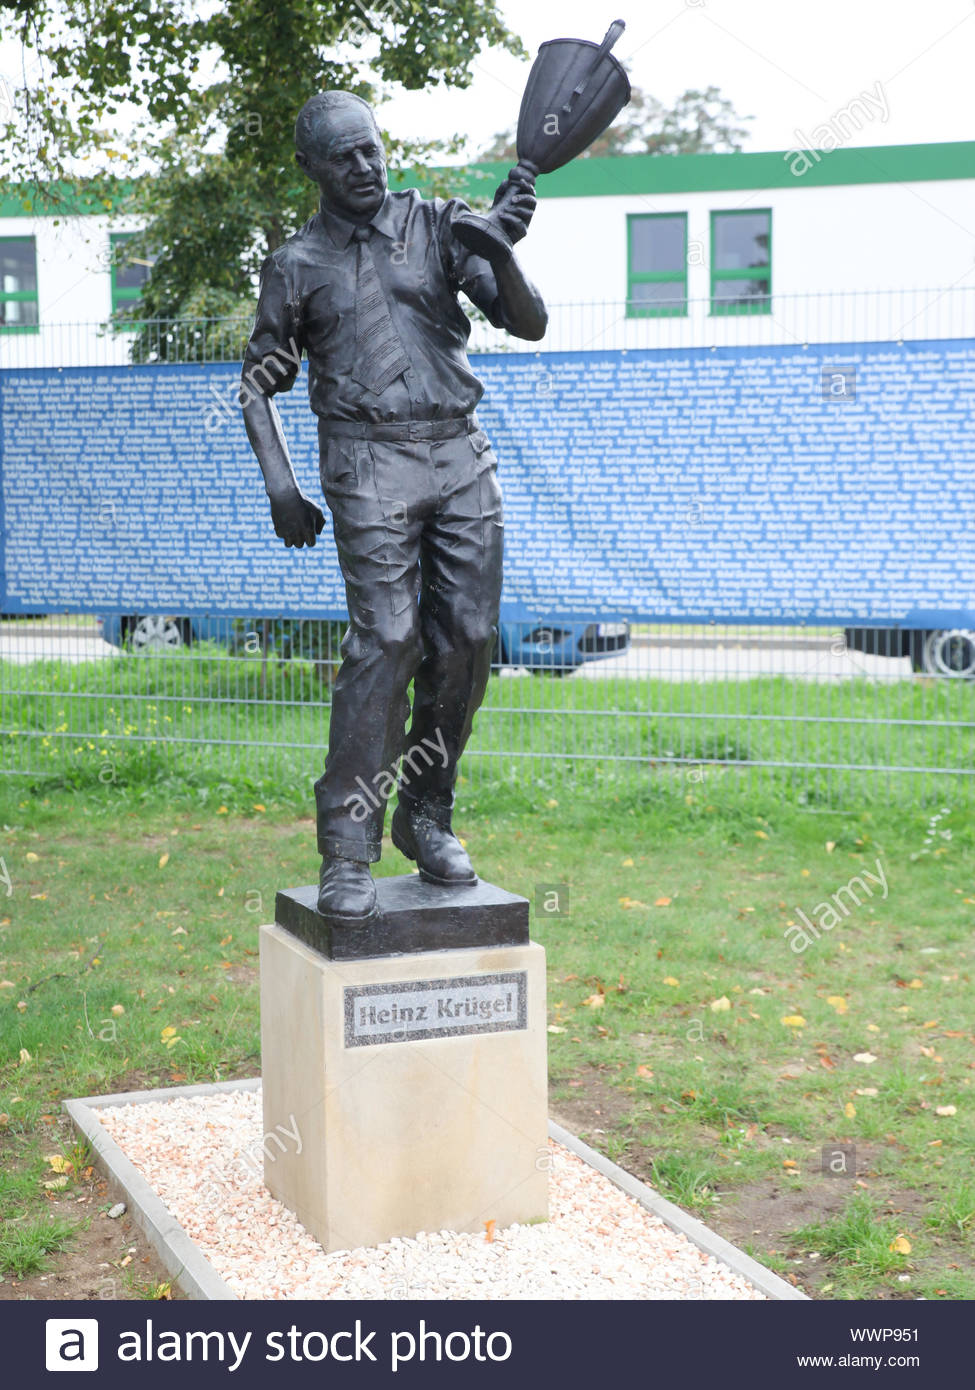 heinz krgel memorial in front of the football stadium mdcc arena magdeburg venue of 1fc magdeburg WWP951